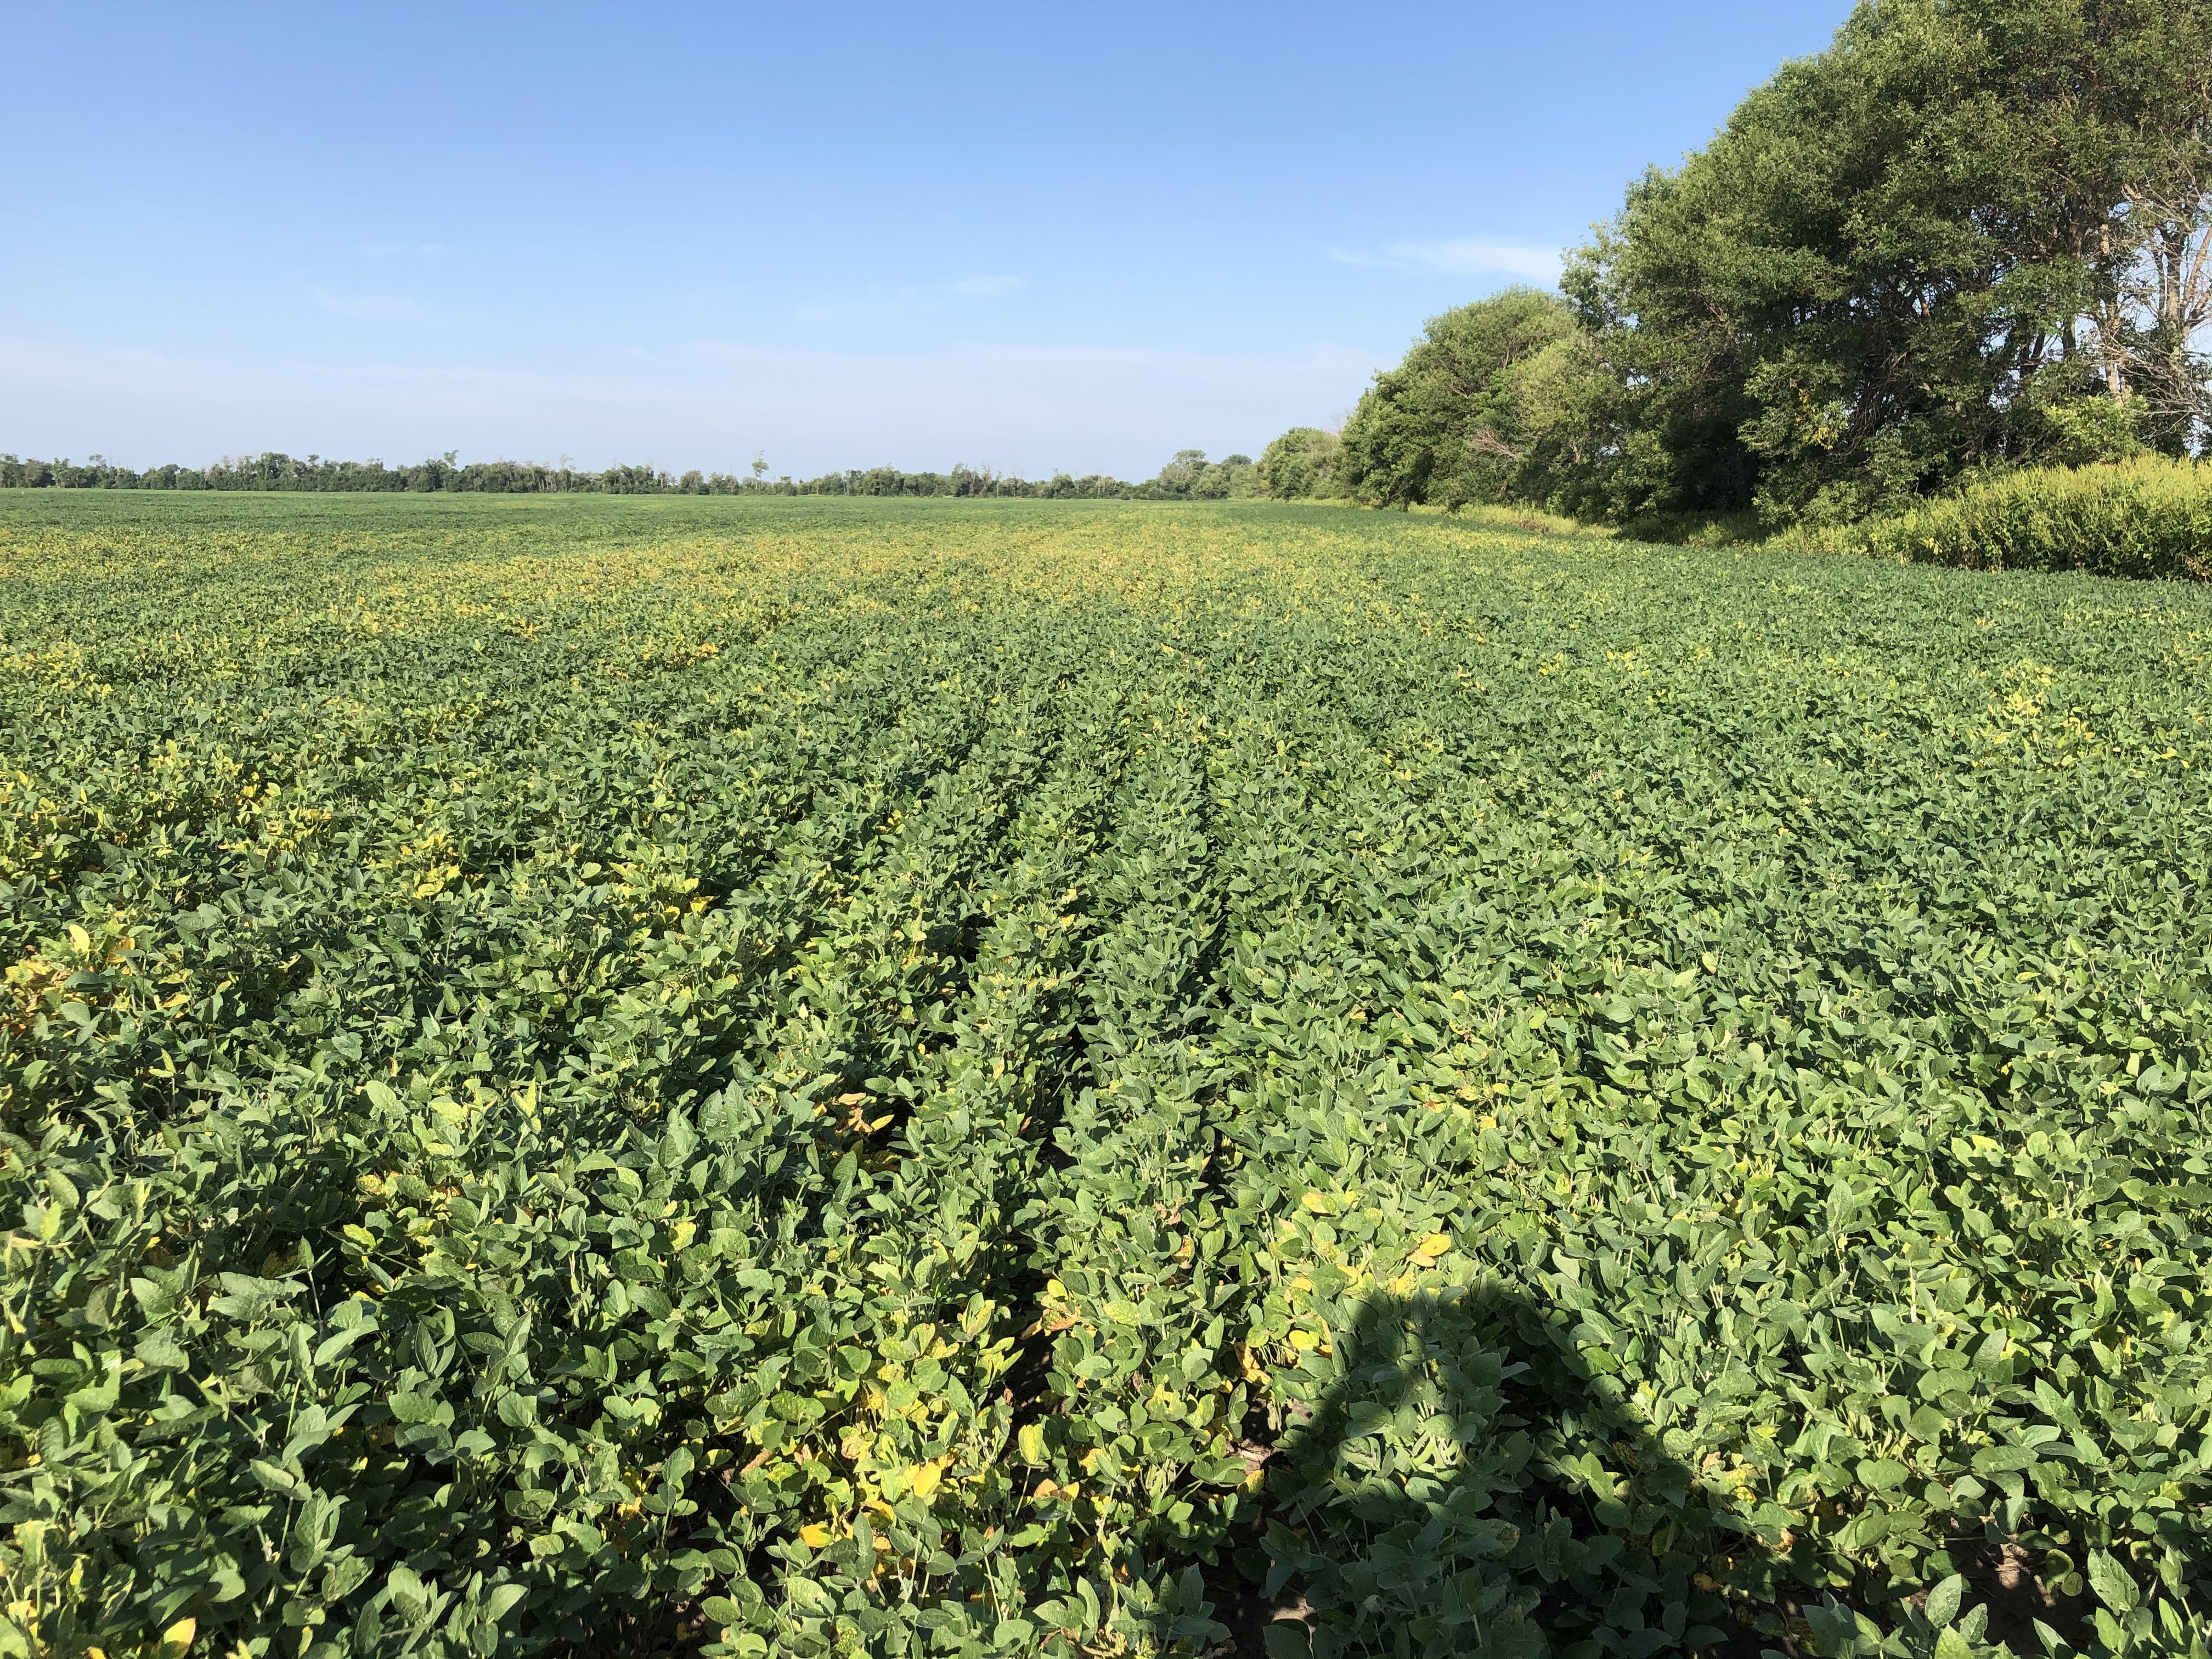 A soybean field with many areas where the plants have yellowing leaves.